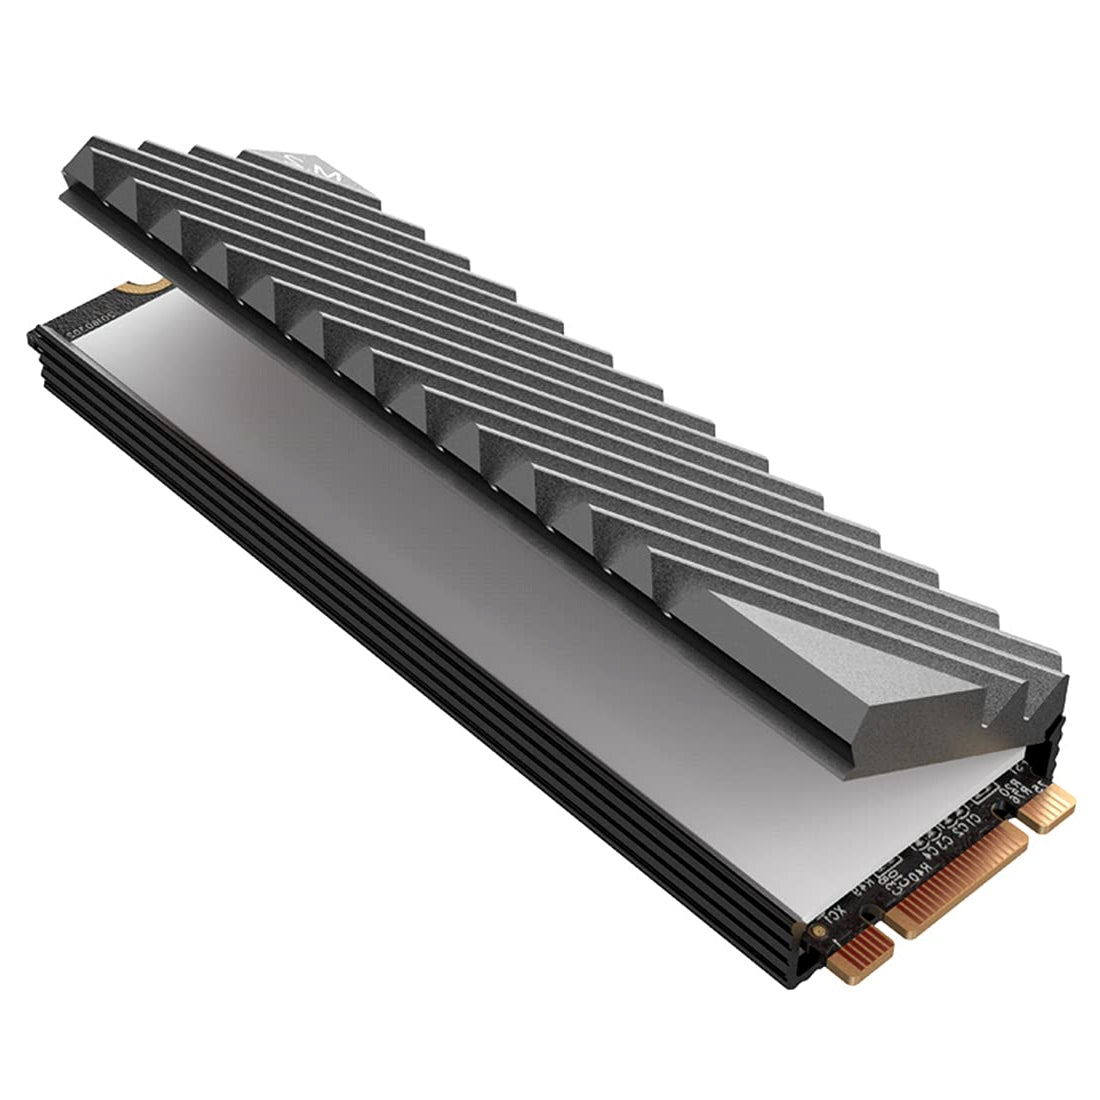 PS5 M2-3 Heat Sink Cooling Double-Sided With Silicone Thermal Pad For PlayStation 5 NVME 2280 Evo SSD Radiator